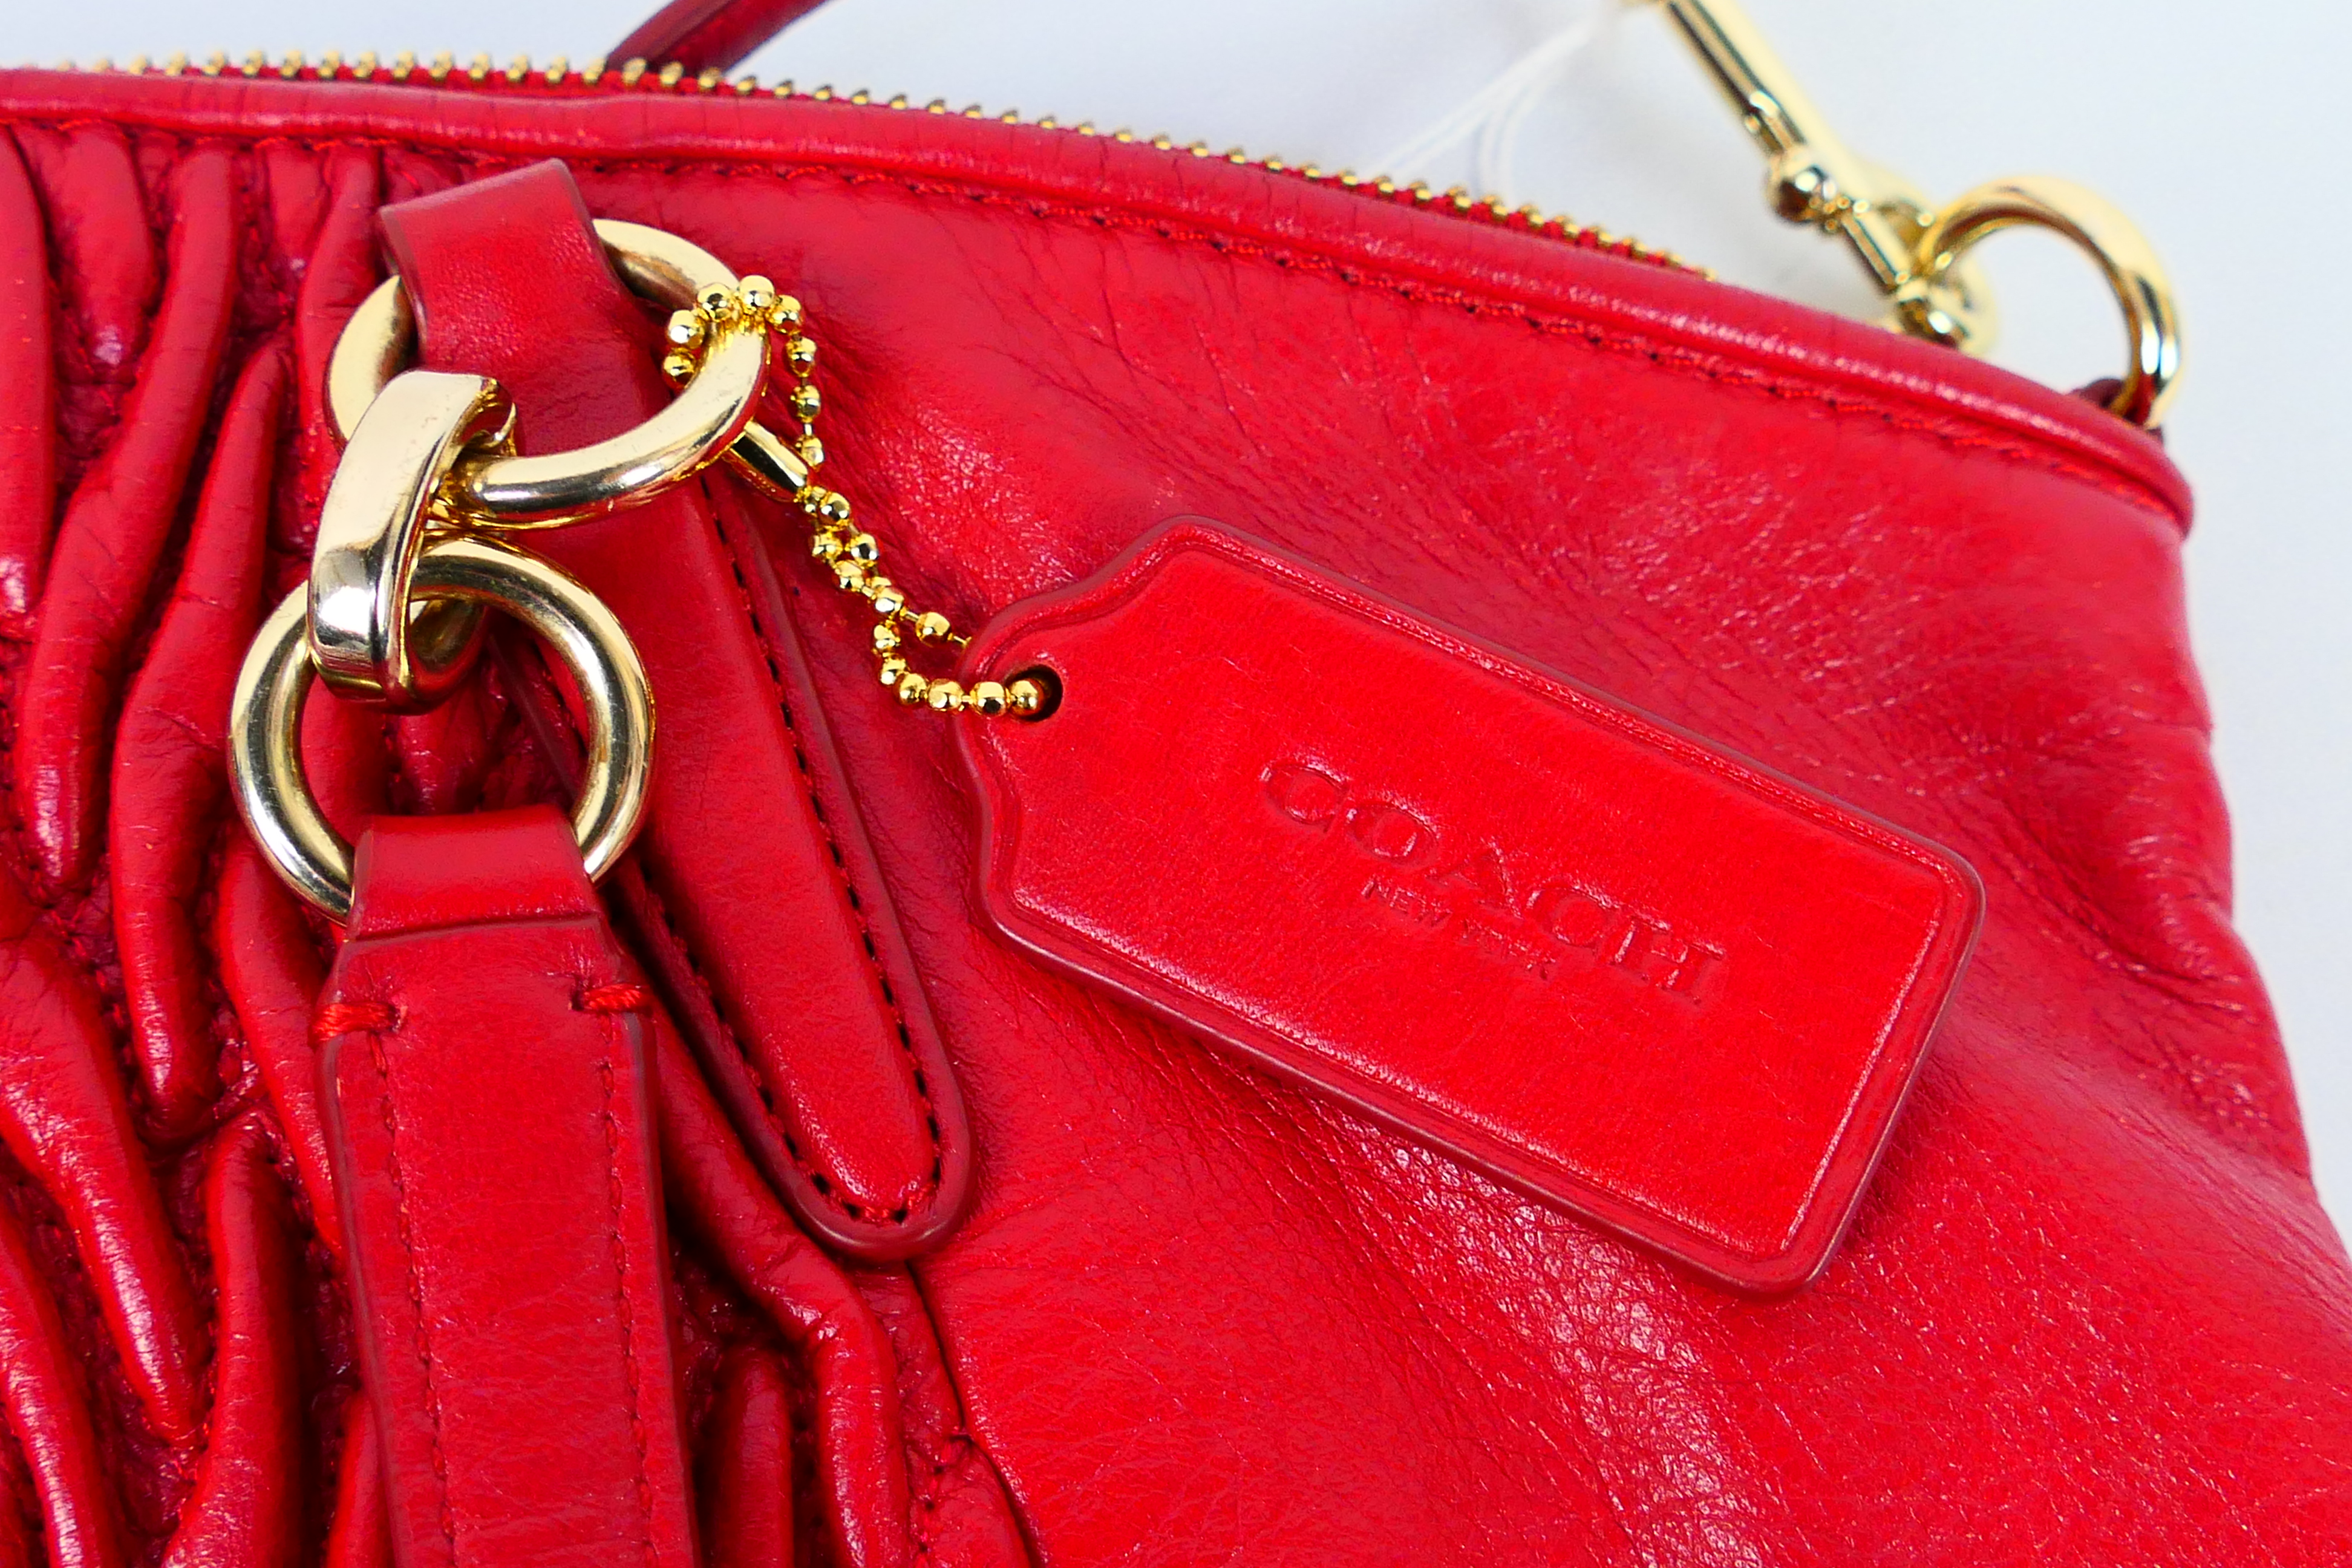 Coach New York - a Red Coach handbag, labelled with makers mark, with shoulder strap, - Image 3 of 7